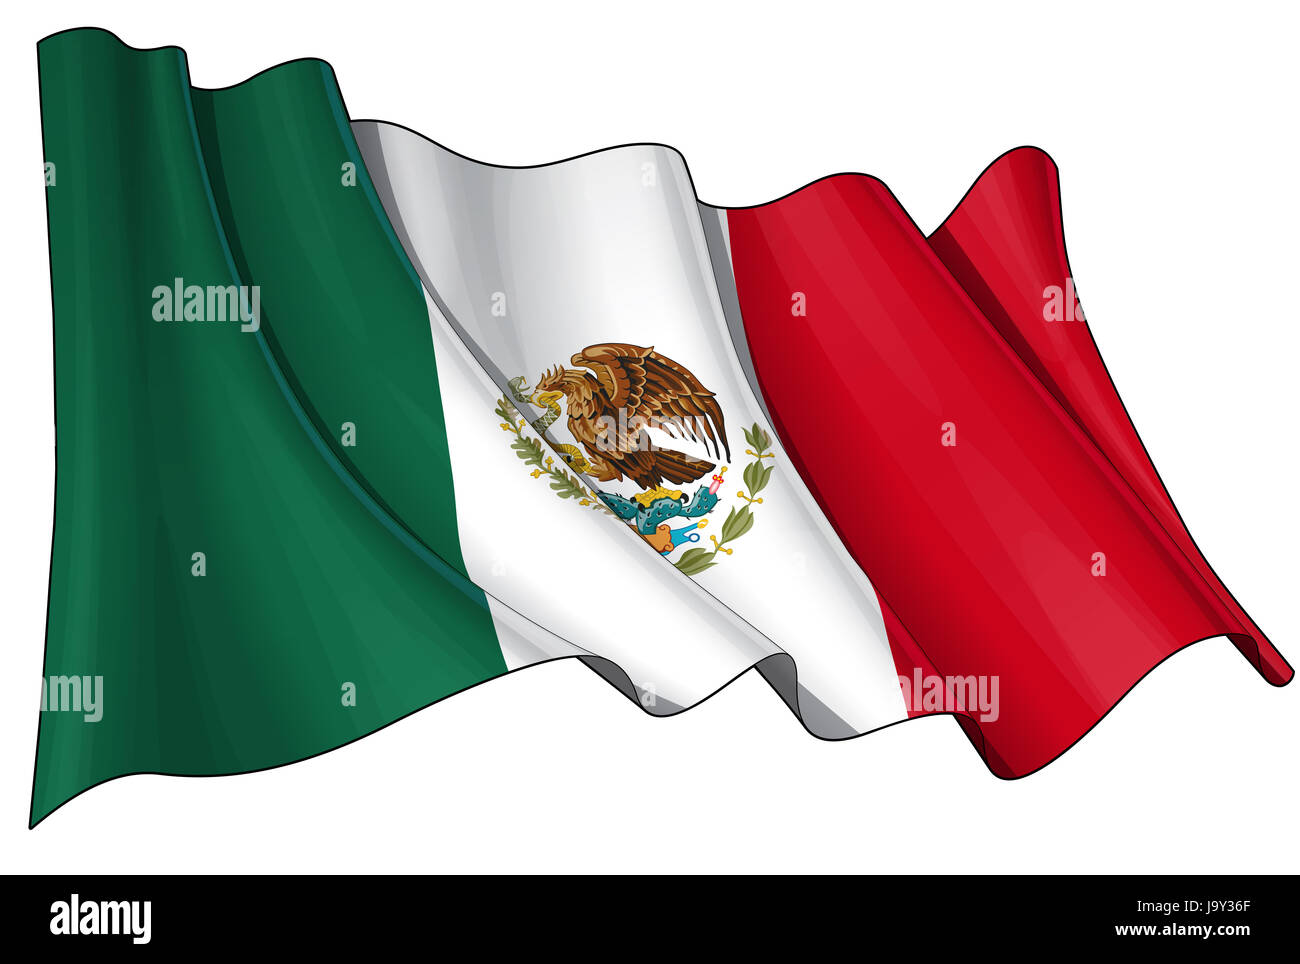 central america, flag, mexico, emblem, green, central america, illustration, Stock Photo